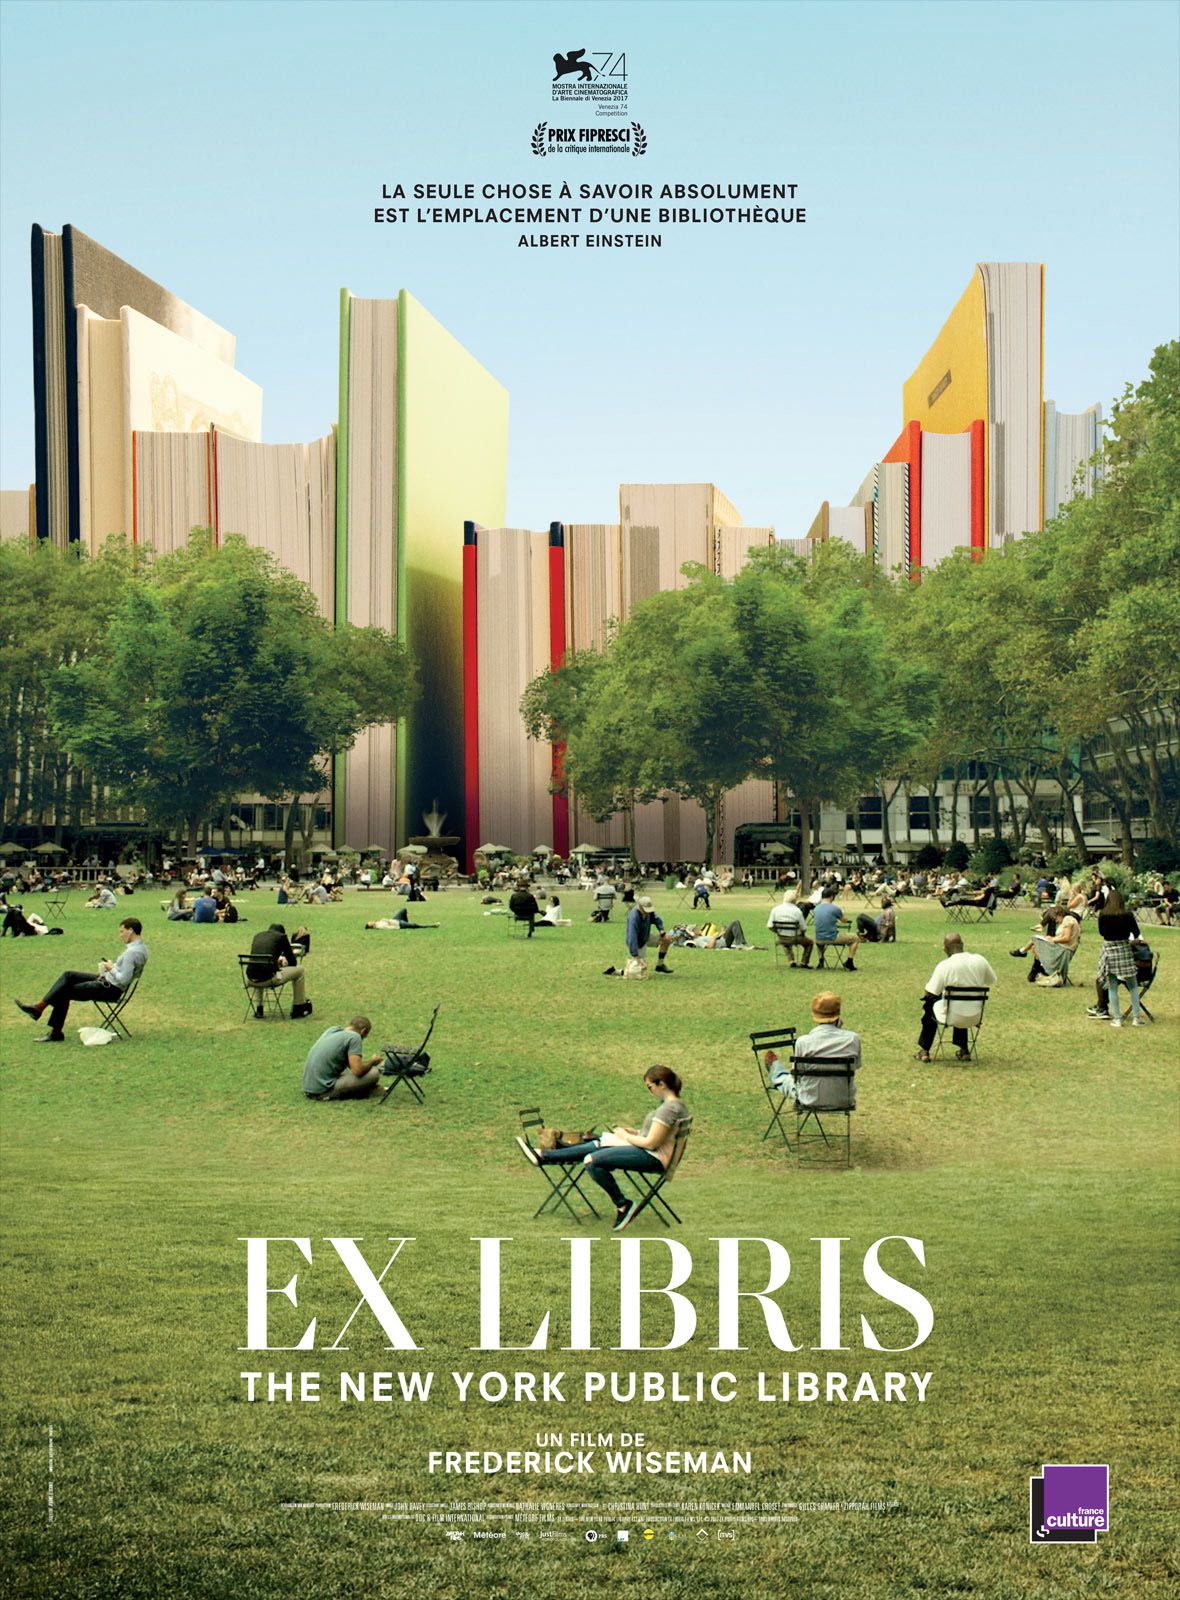 Ex Libris - The New York Public Library - Documentaire (2017) streaming VF gratuit complet